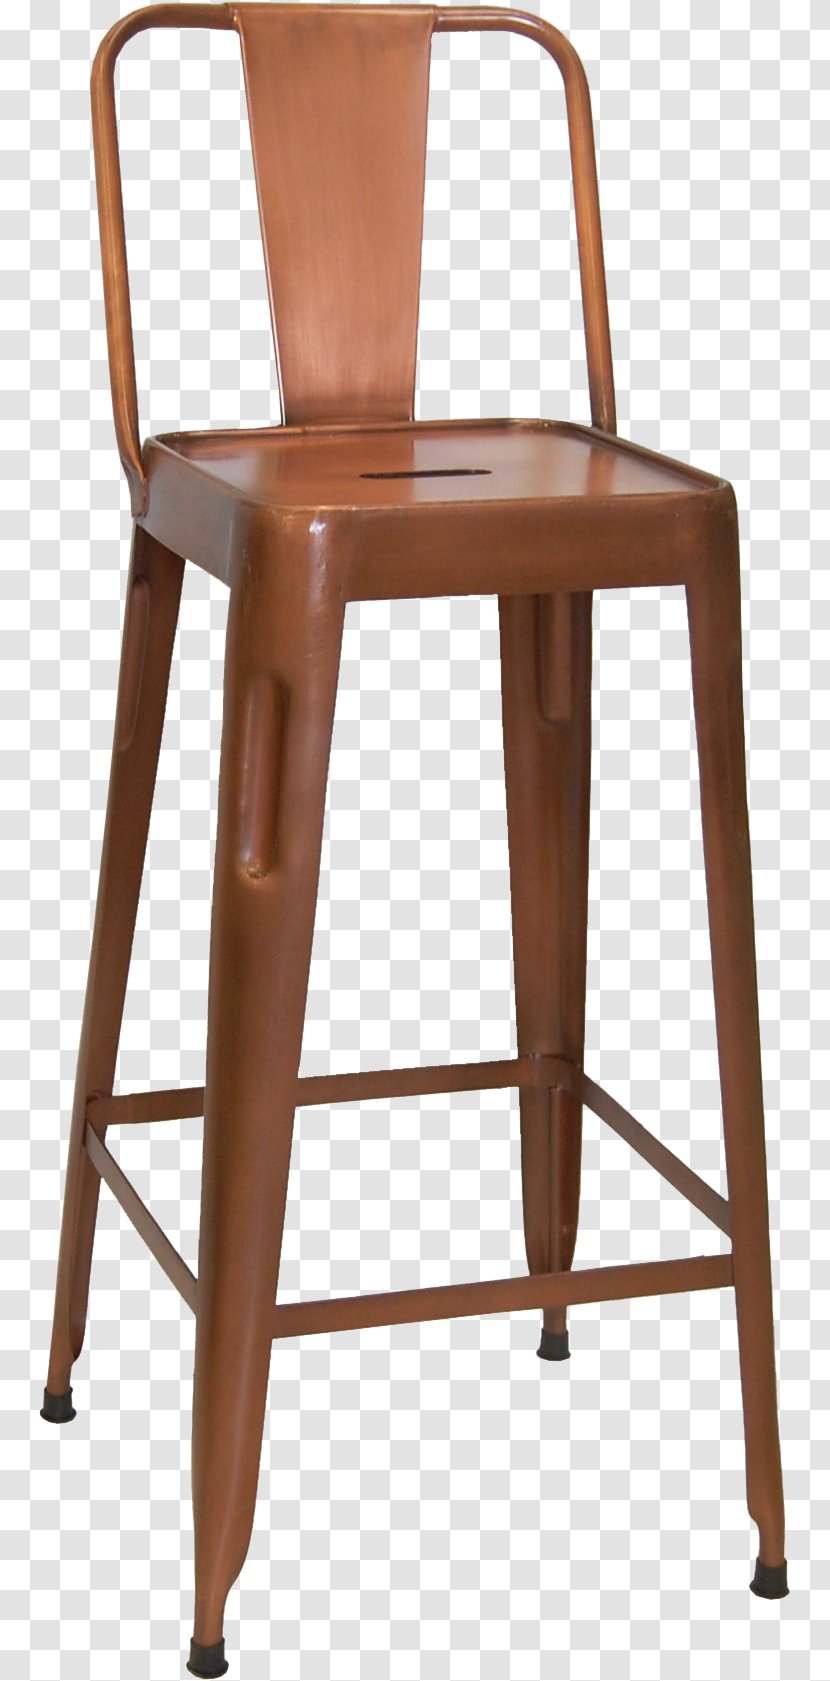 Table Bar Stool Chair Seat Transparent PNG